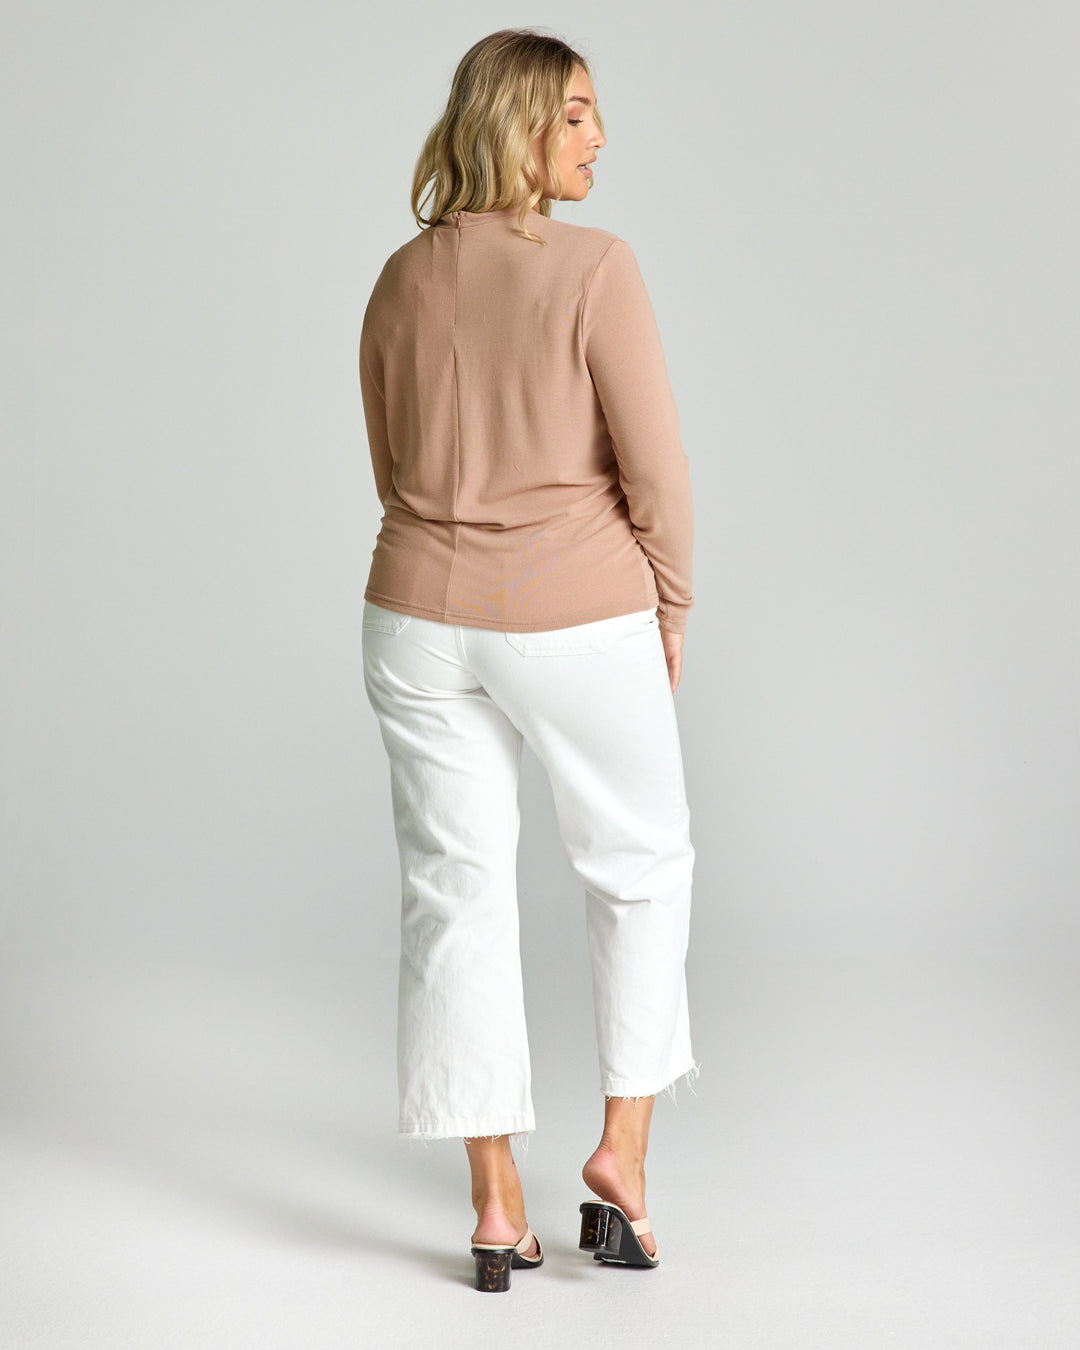 Blaise Embroidered Long Sleeve Top - Blush Nude